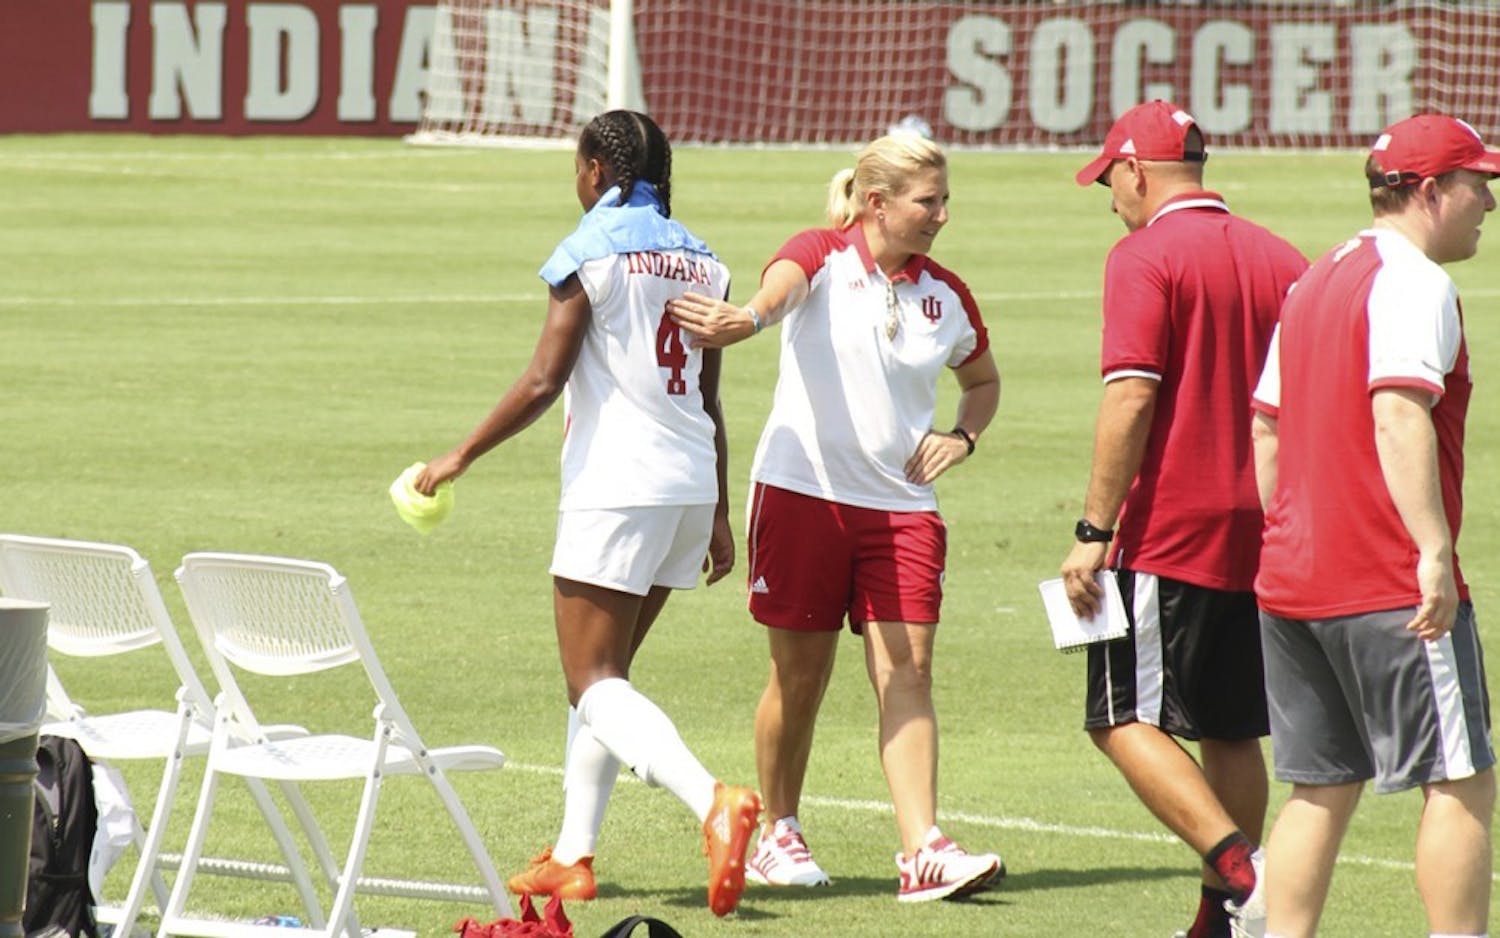 Former IU women's soccer Coach Amy Berbary pats Mykayla Brown on the back after a game Aug. 28, 2016 at Bill Armstrong Stadium. IU athletics announced Thursday that Berbary's contract would not be renewed.